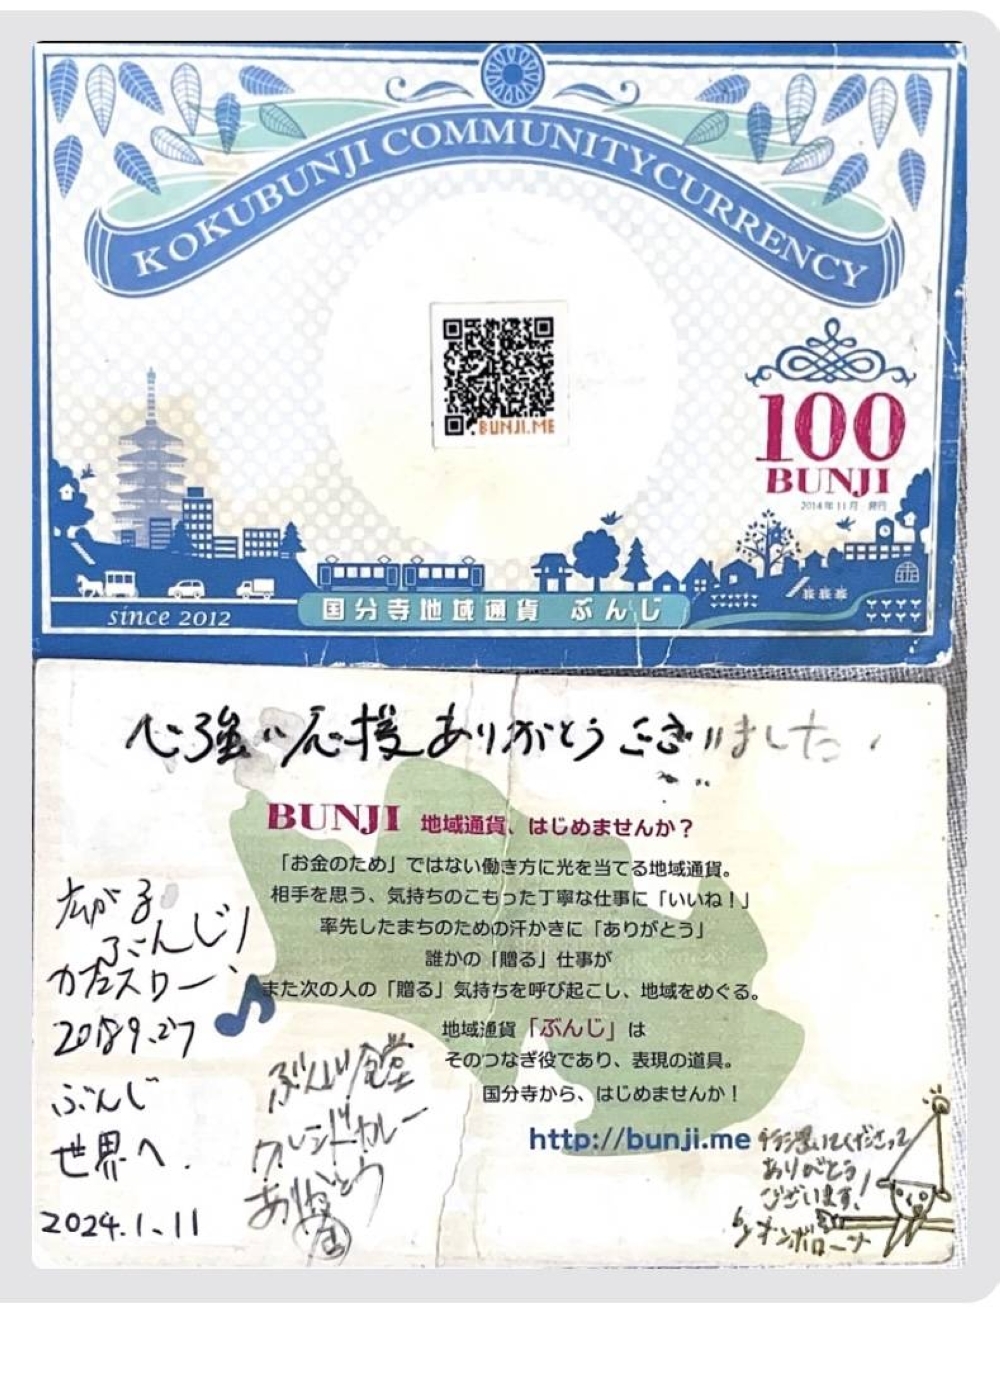 The “bunji” is a unique local currency in Kokubunji, in west Tokyo, whose users pen messages on the back of the notes to help foster deeper community connections. Messages on the note pictured here include expressions of gratitude for service where the currency was spent. 